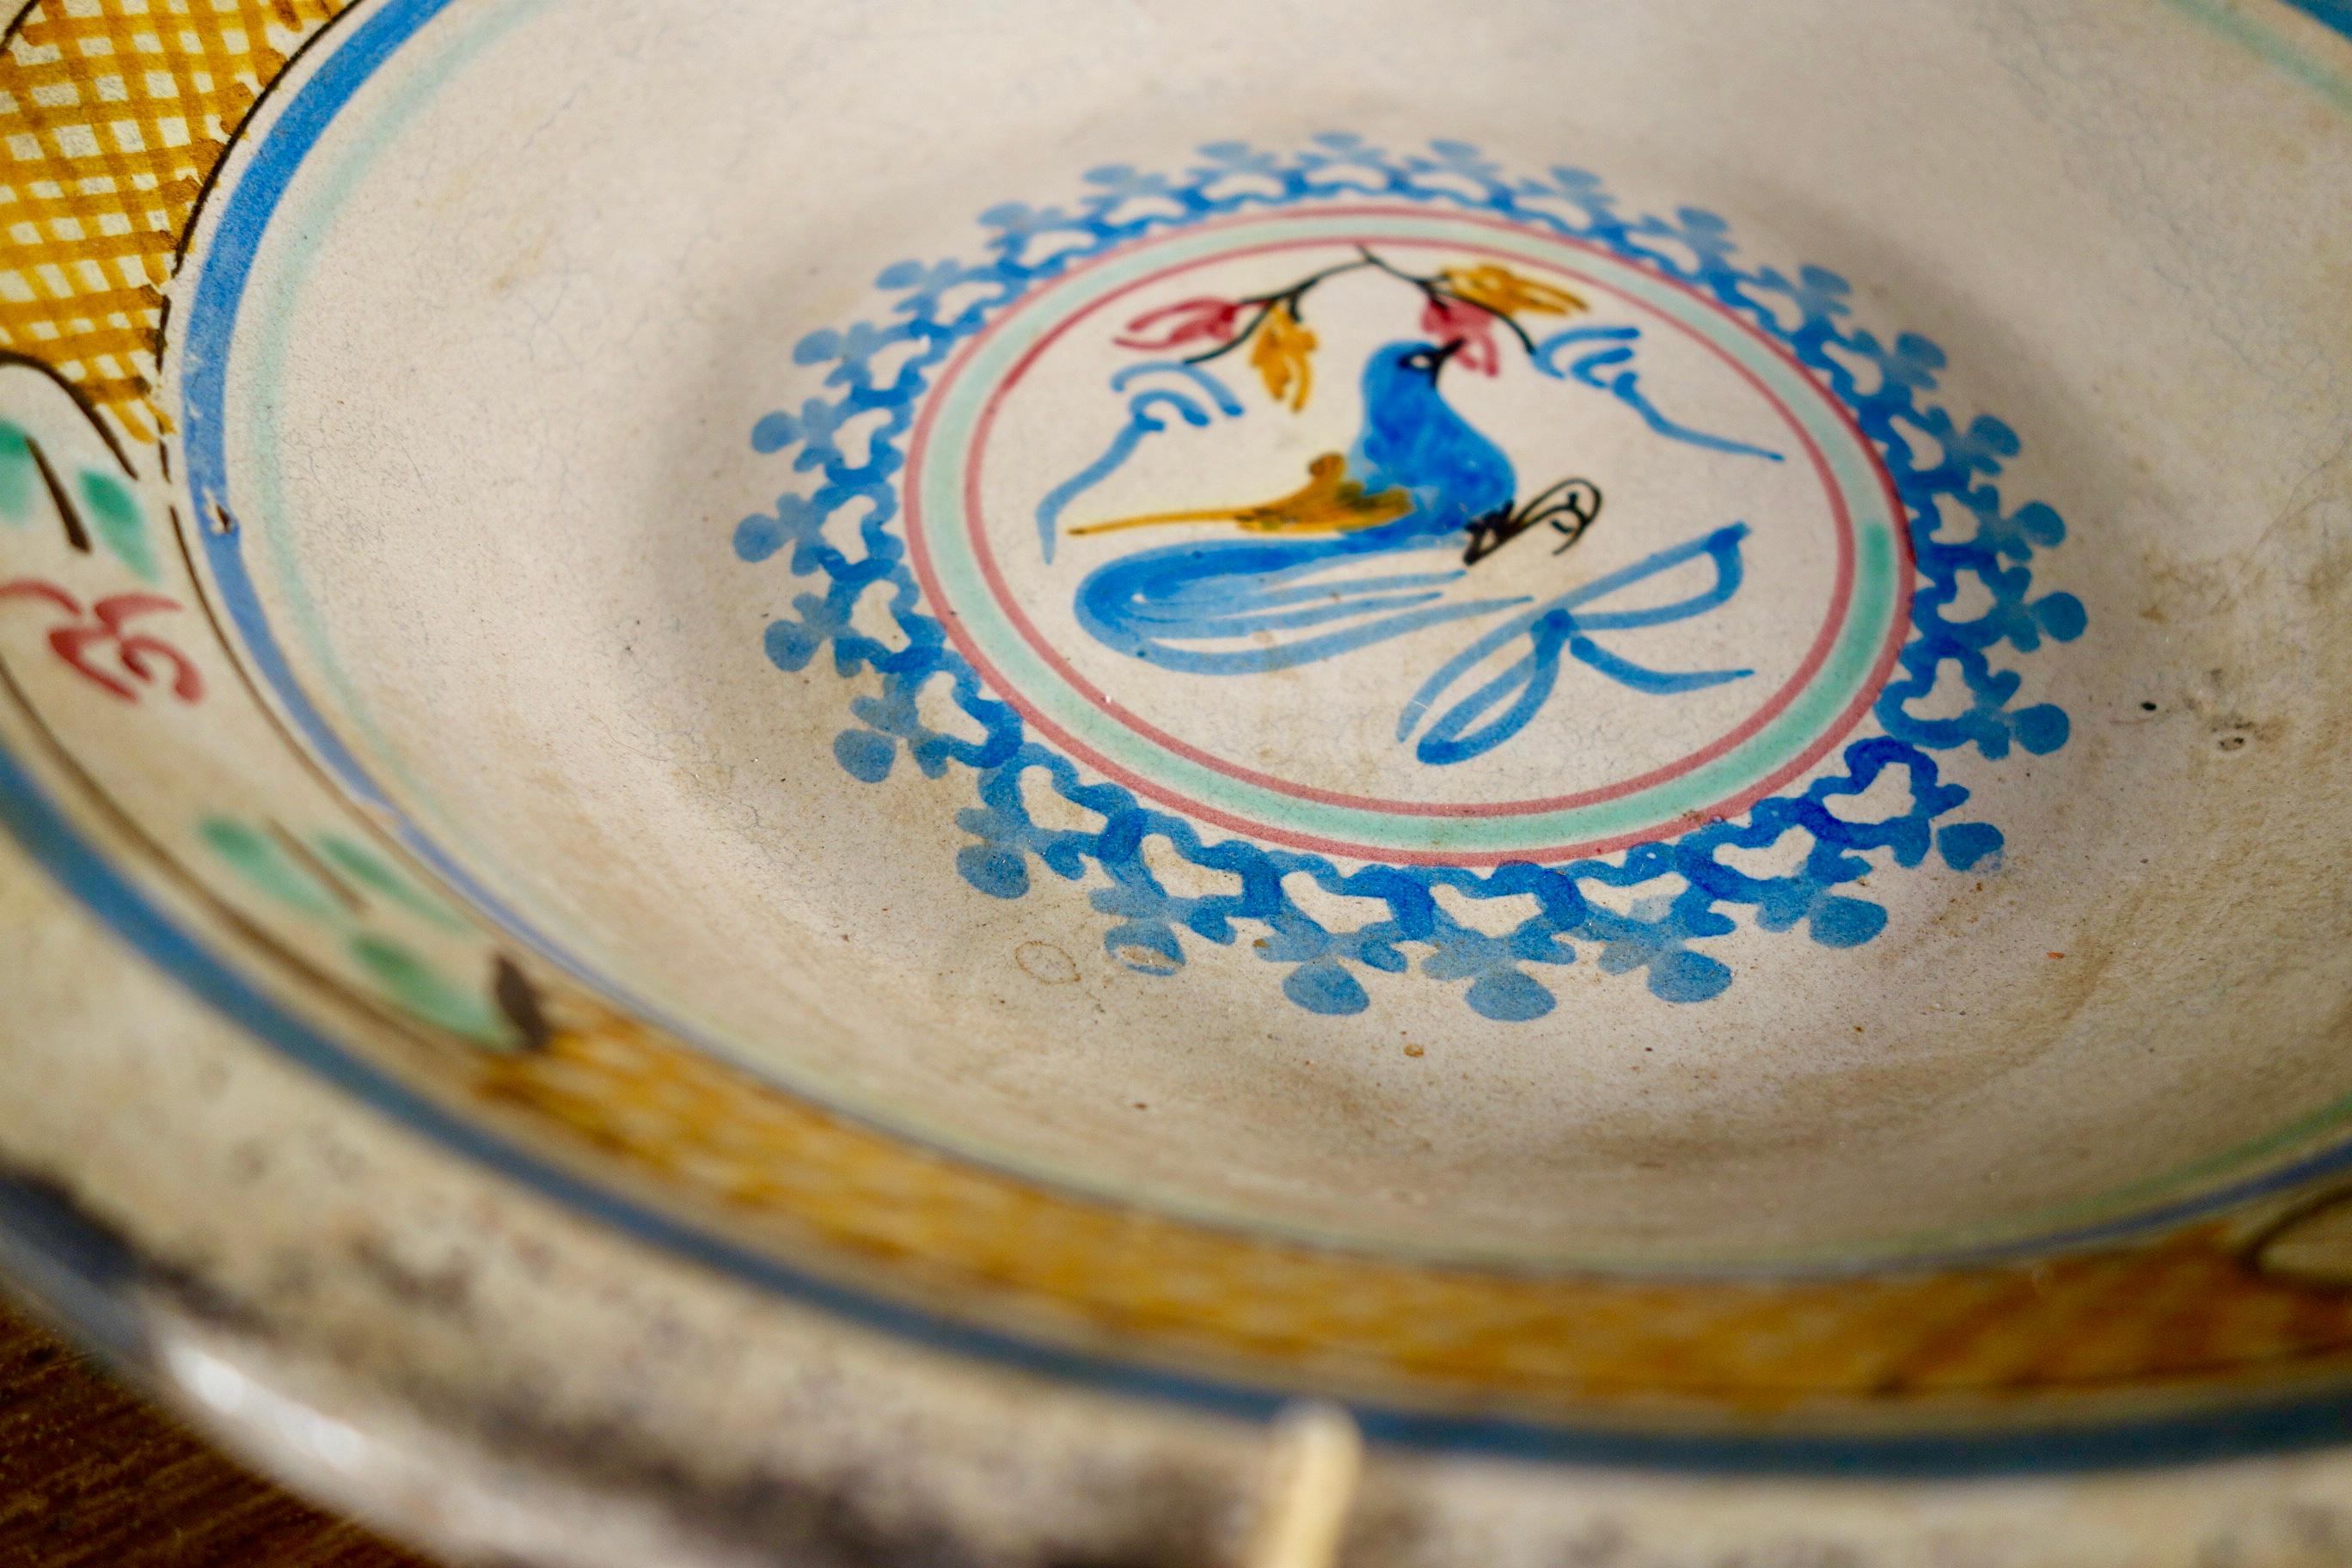 A Spanish tin glaze bowl, featuring vivid repetitive geometric style decorations, with the center base of the bowl featuring a blue hand painted bird. Displaying simplistic designs throughout with strong tones of yellow pink and blue.
Measures: